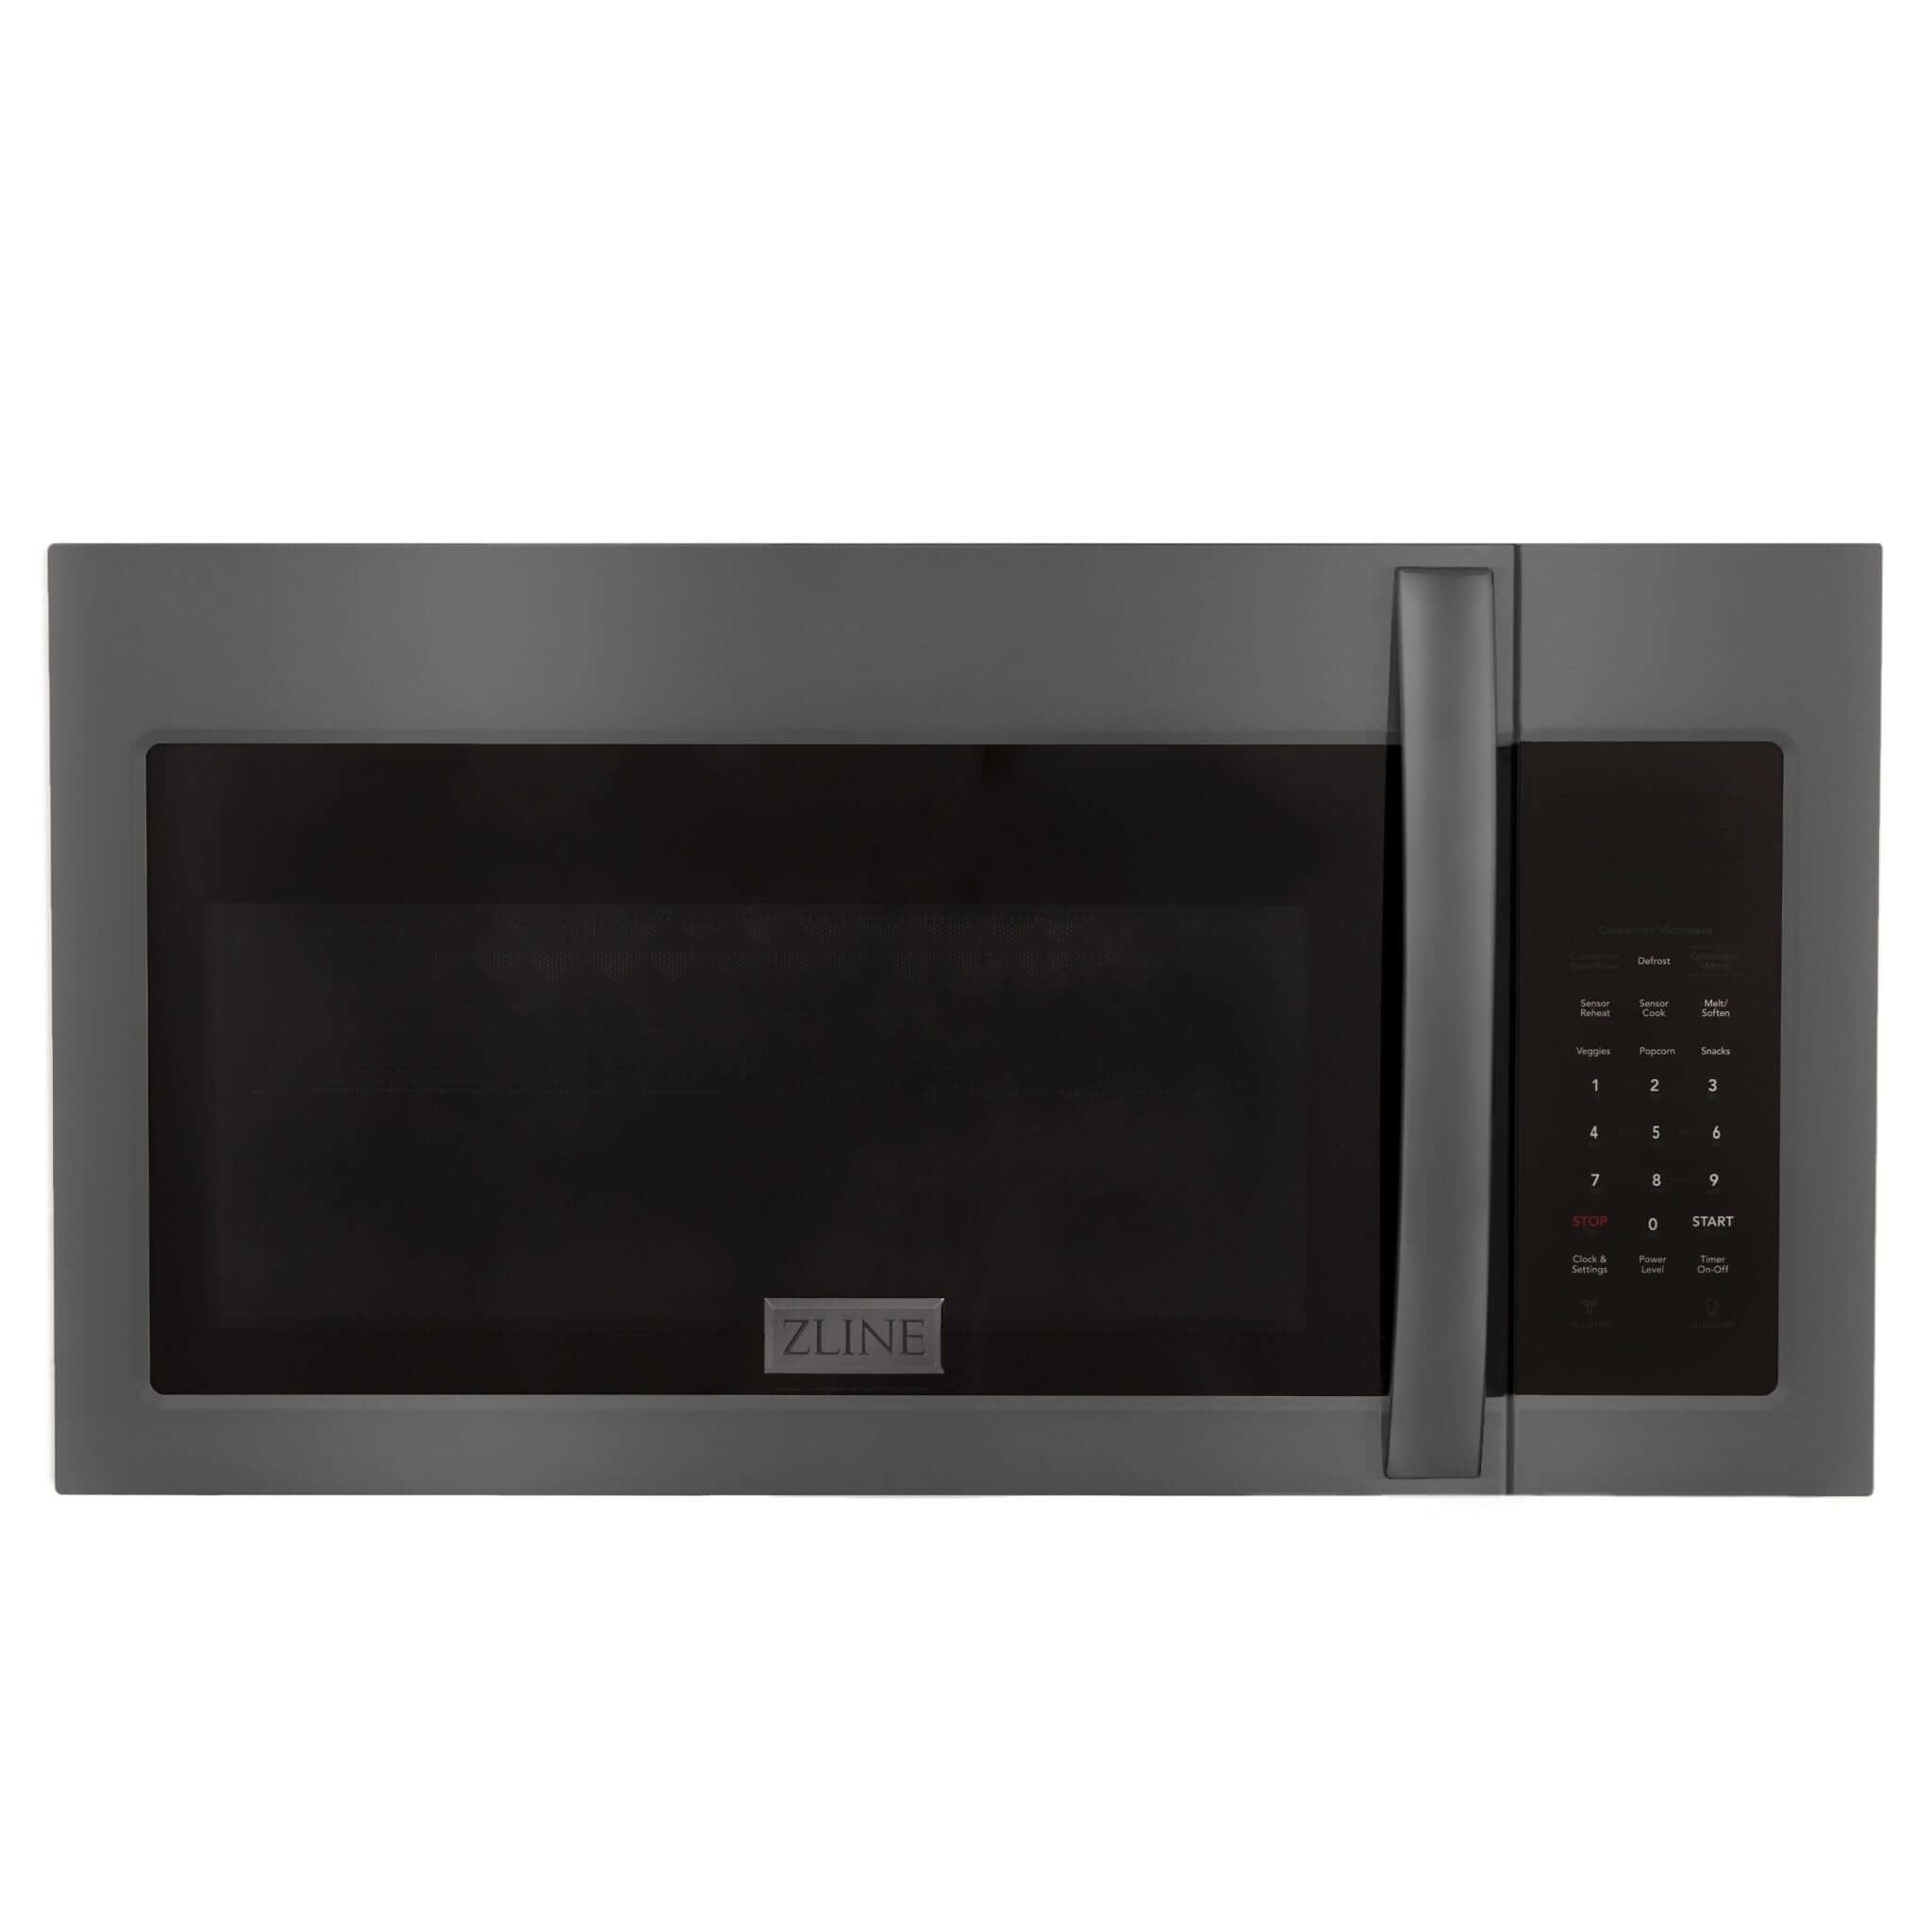 ZLINE Recirculating Over the Range Convection Microwave Oven with Charcoal Filters in Black Stainless Steel (MWO-OTRCF-30-BS) Front View